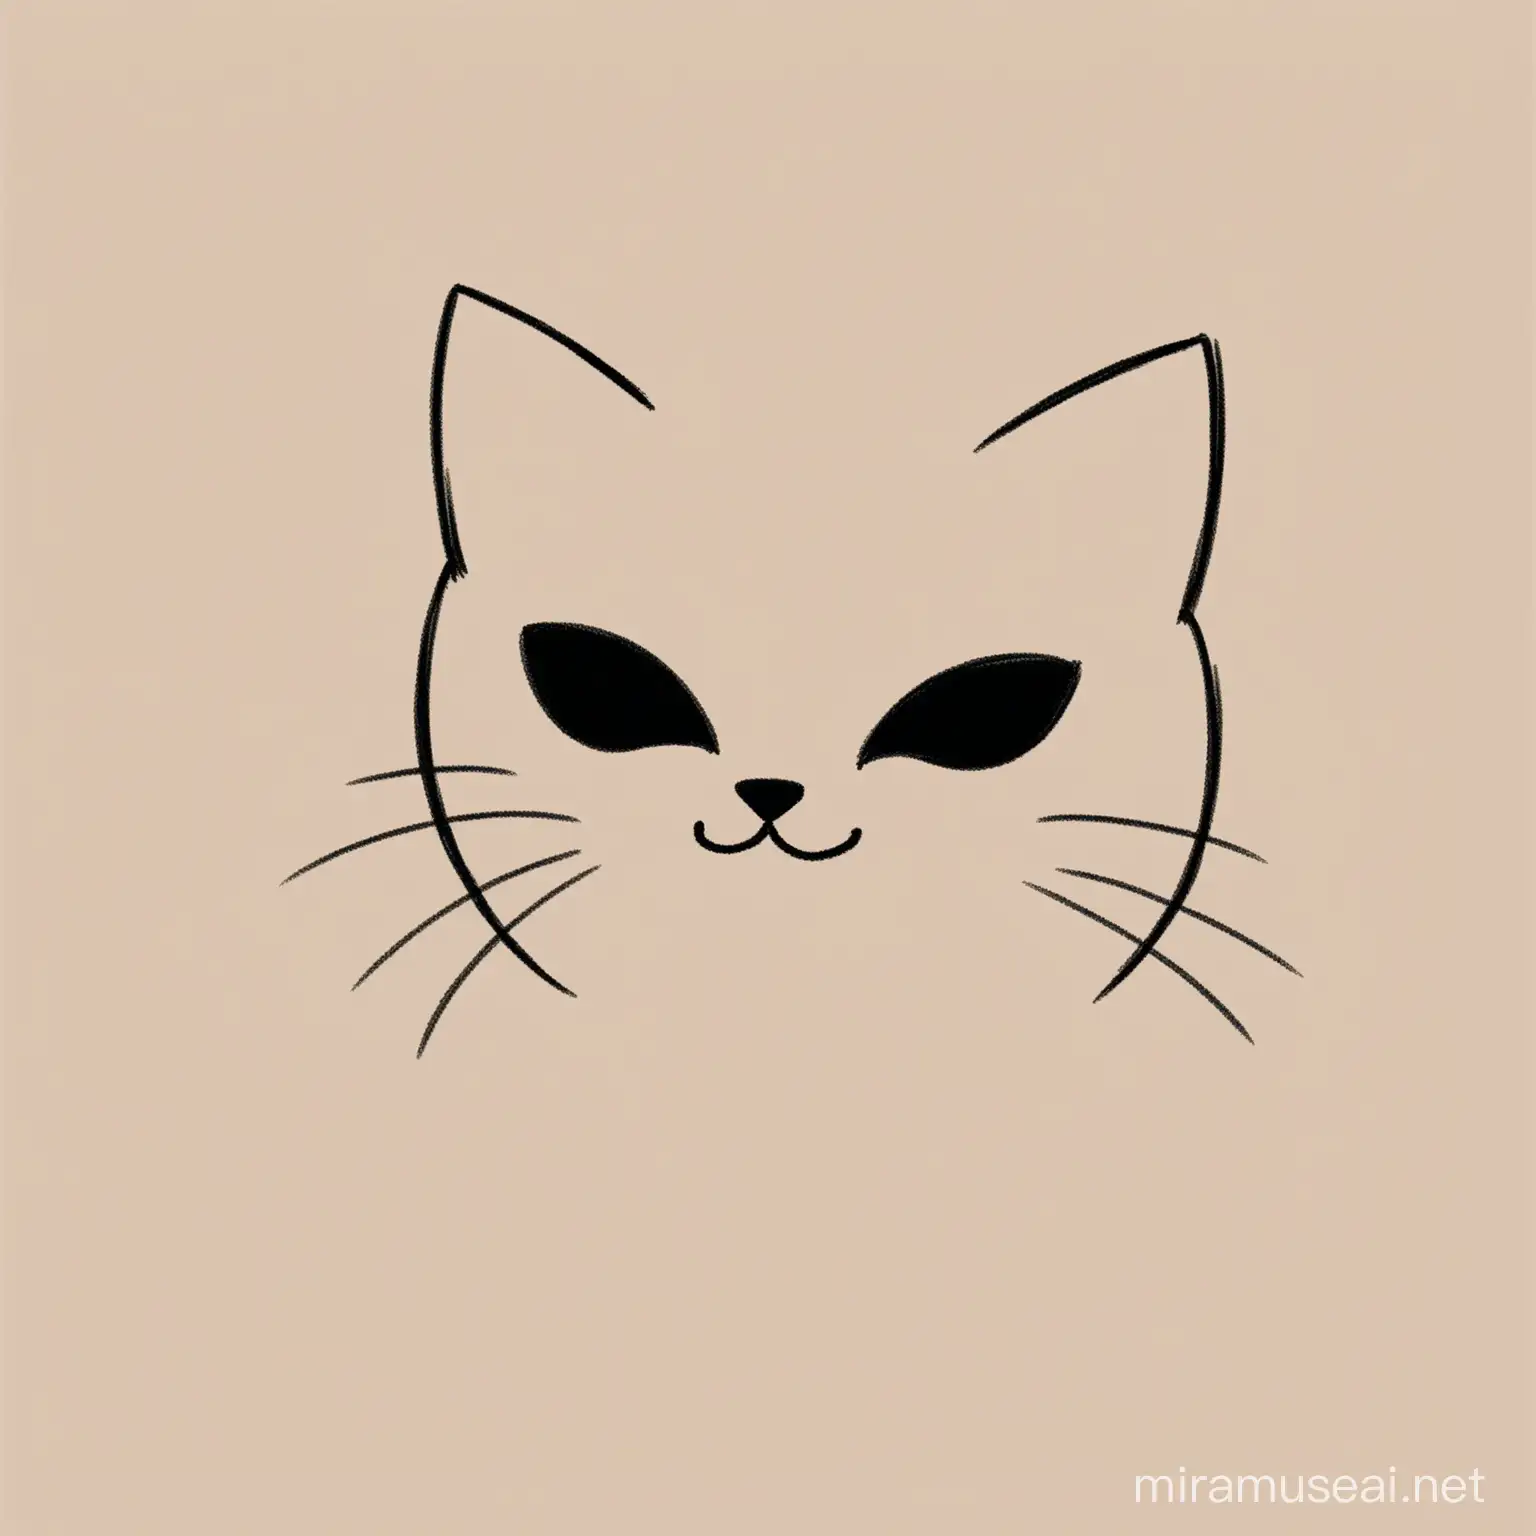 draw an image of shady cat